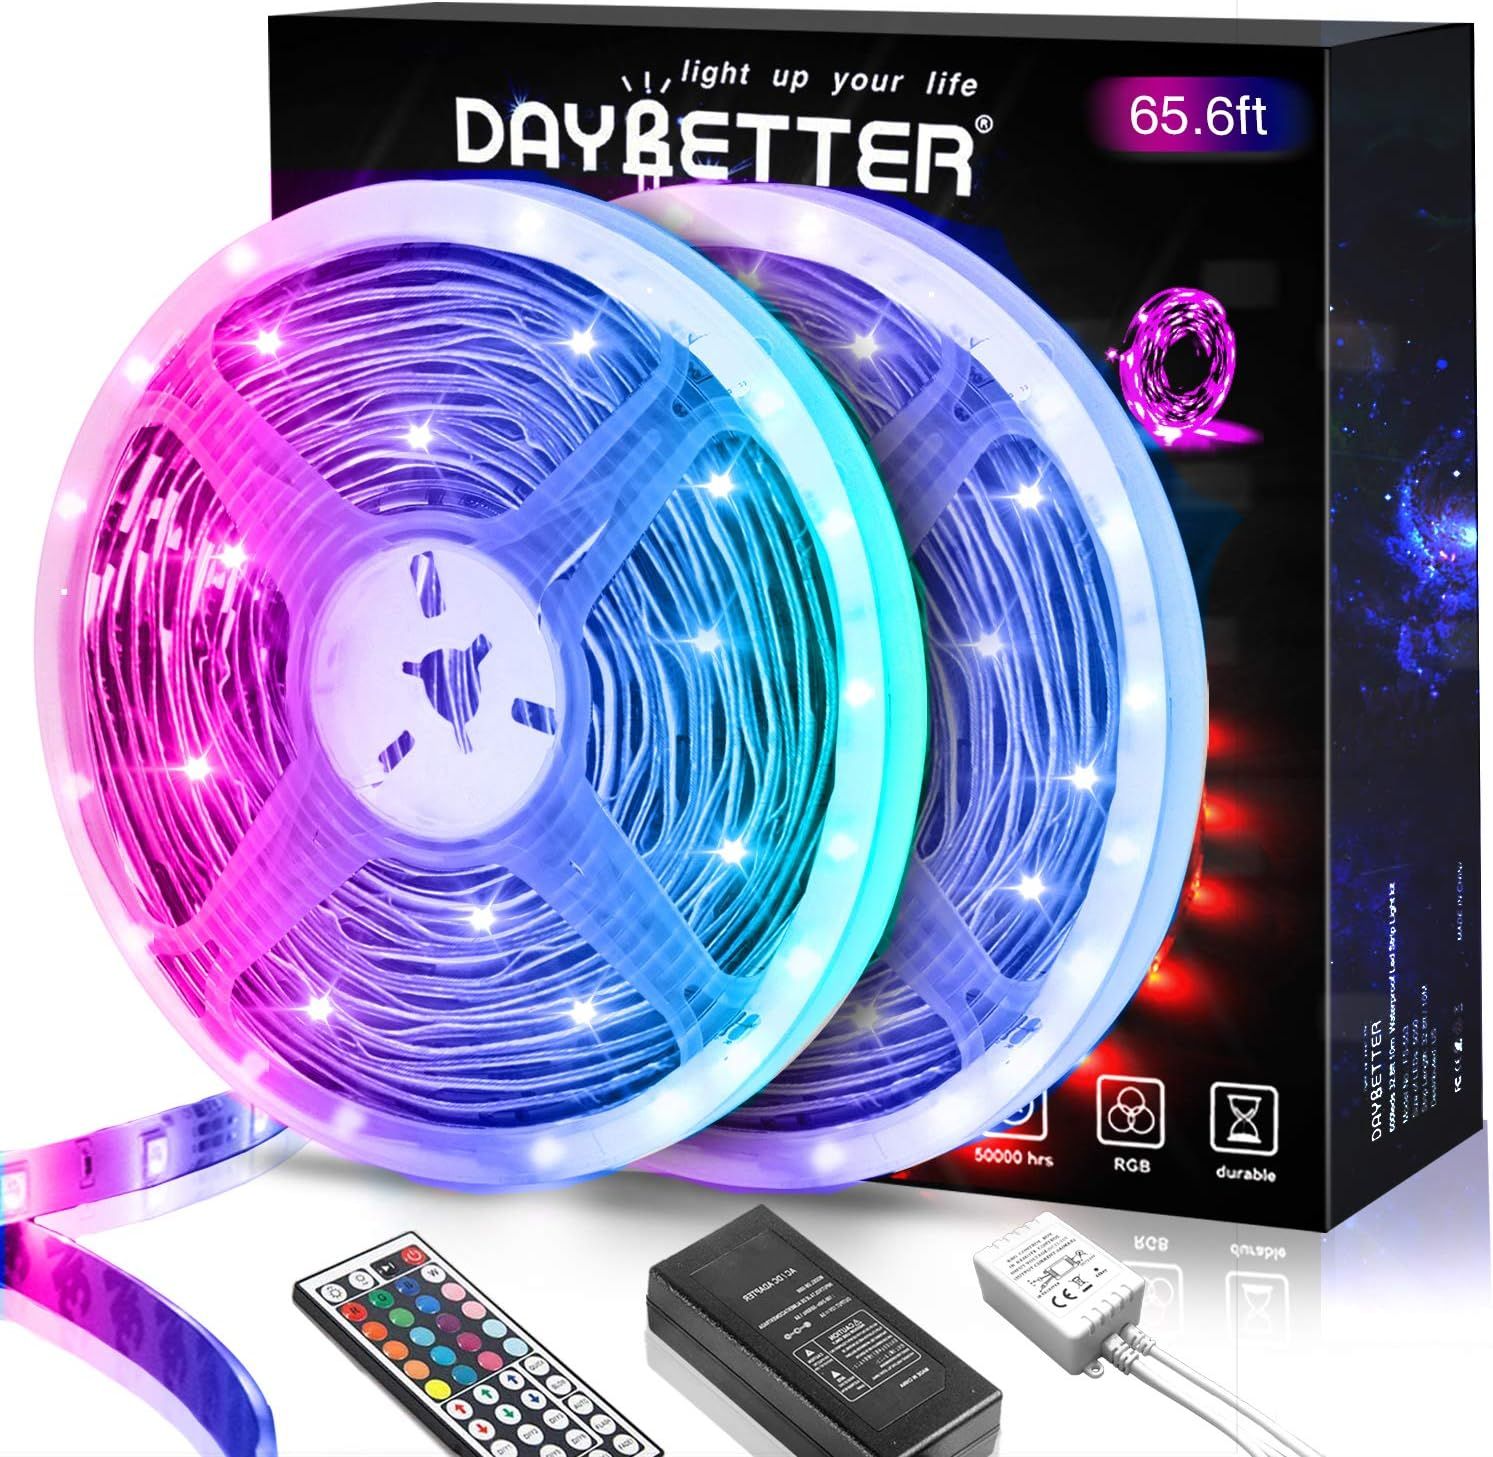 Daybetter 5050 RGB Flexible Color Changing Remote Control Led Strip Lights - 65.6ft | Amazon (US)